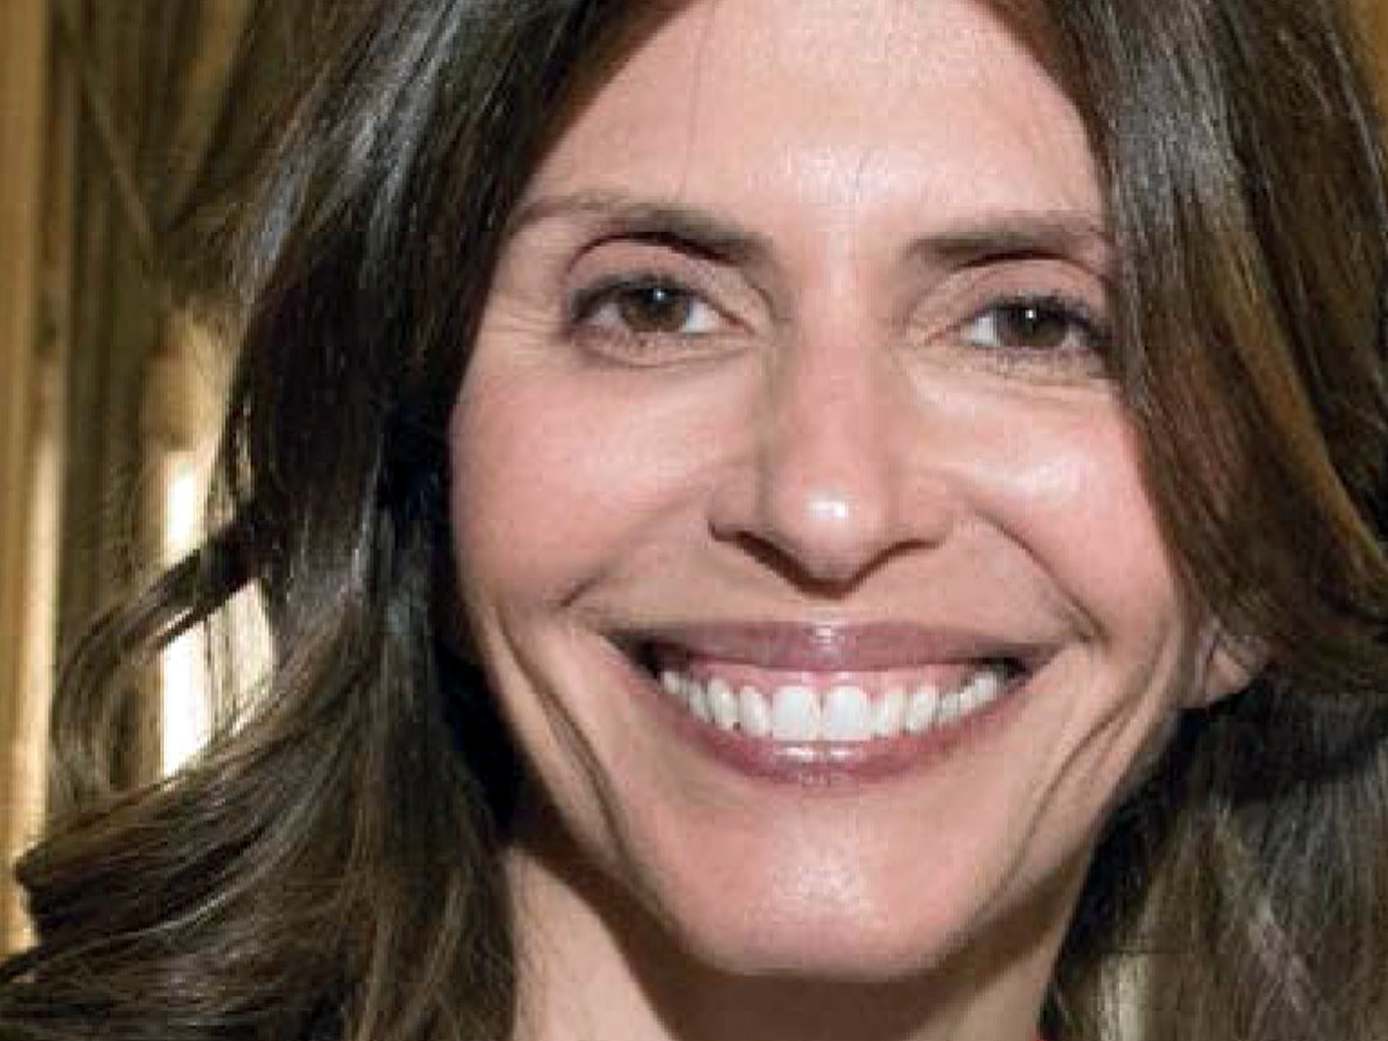 Jennifer Dulos was last seen dropping off her children at school in New Canaan, Connecticut